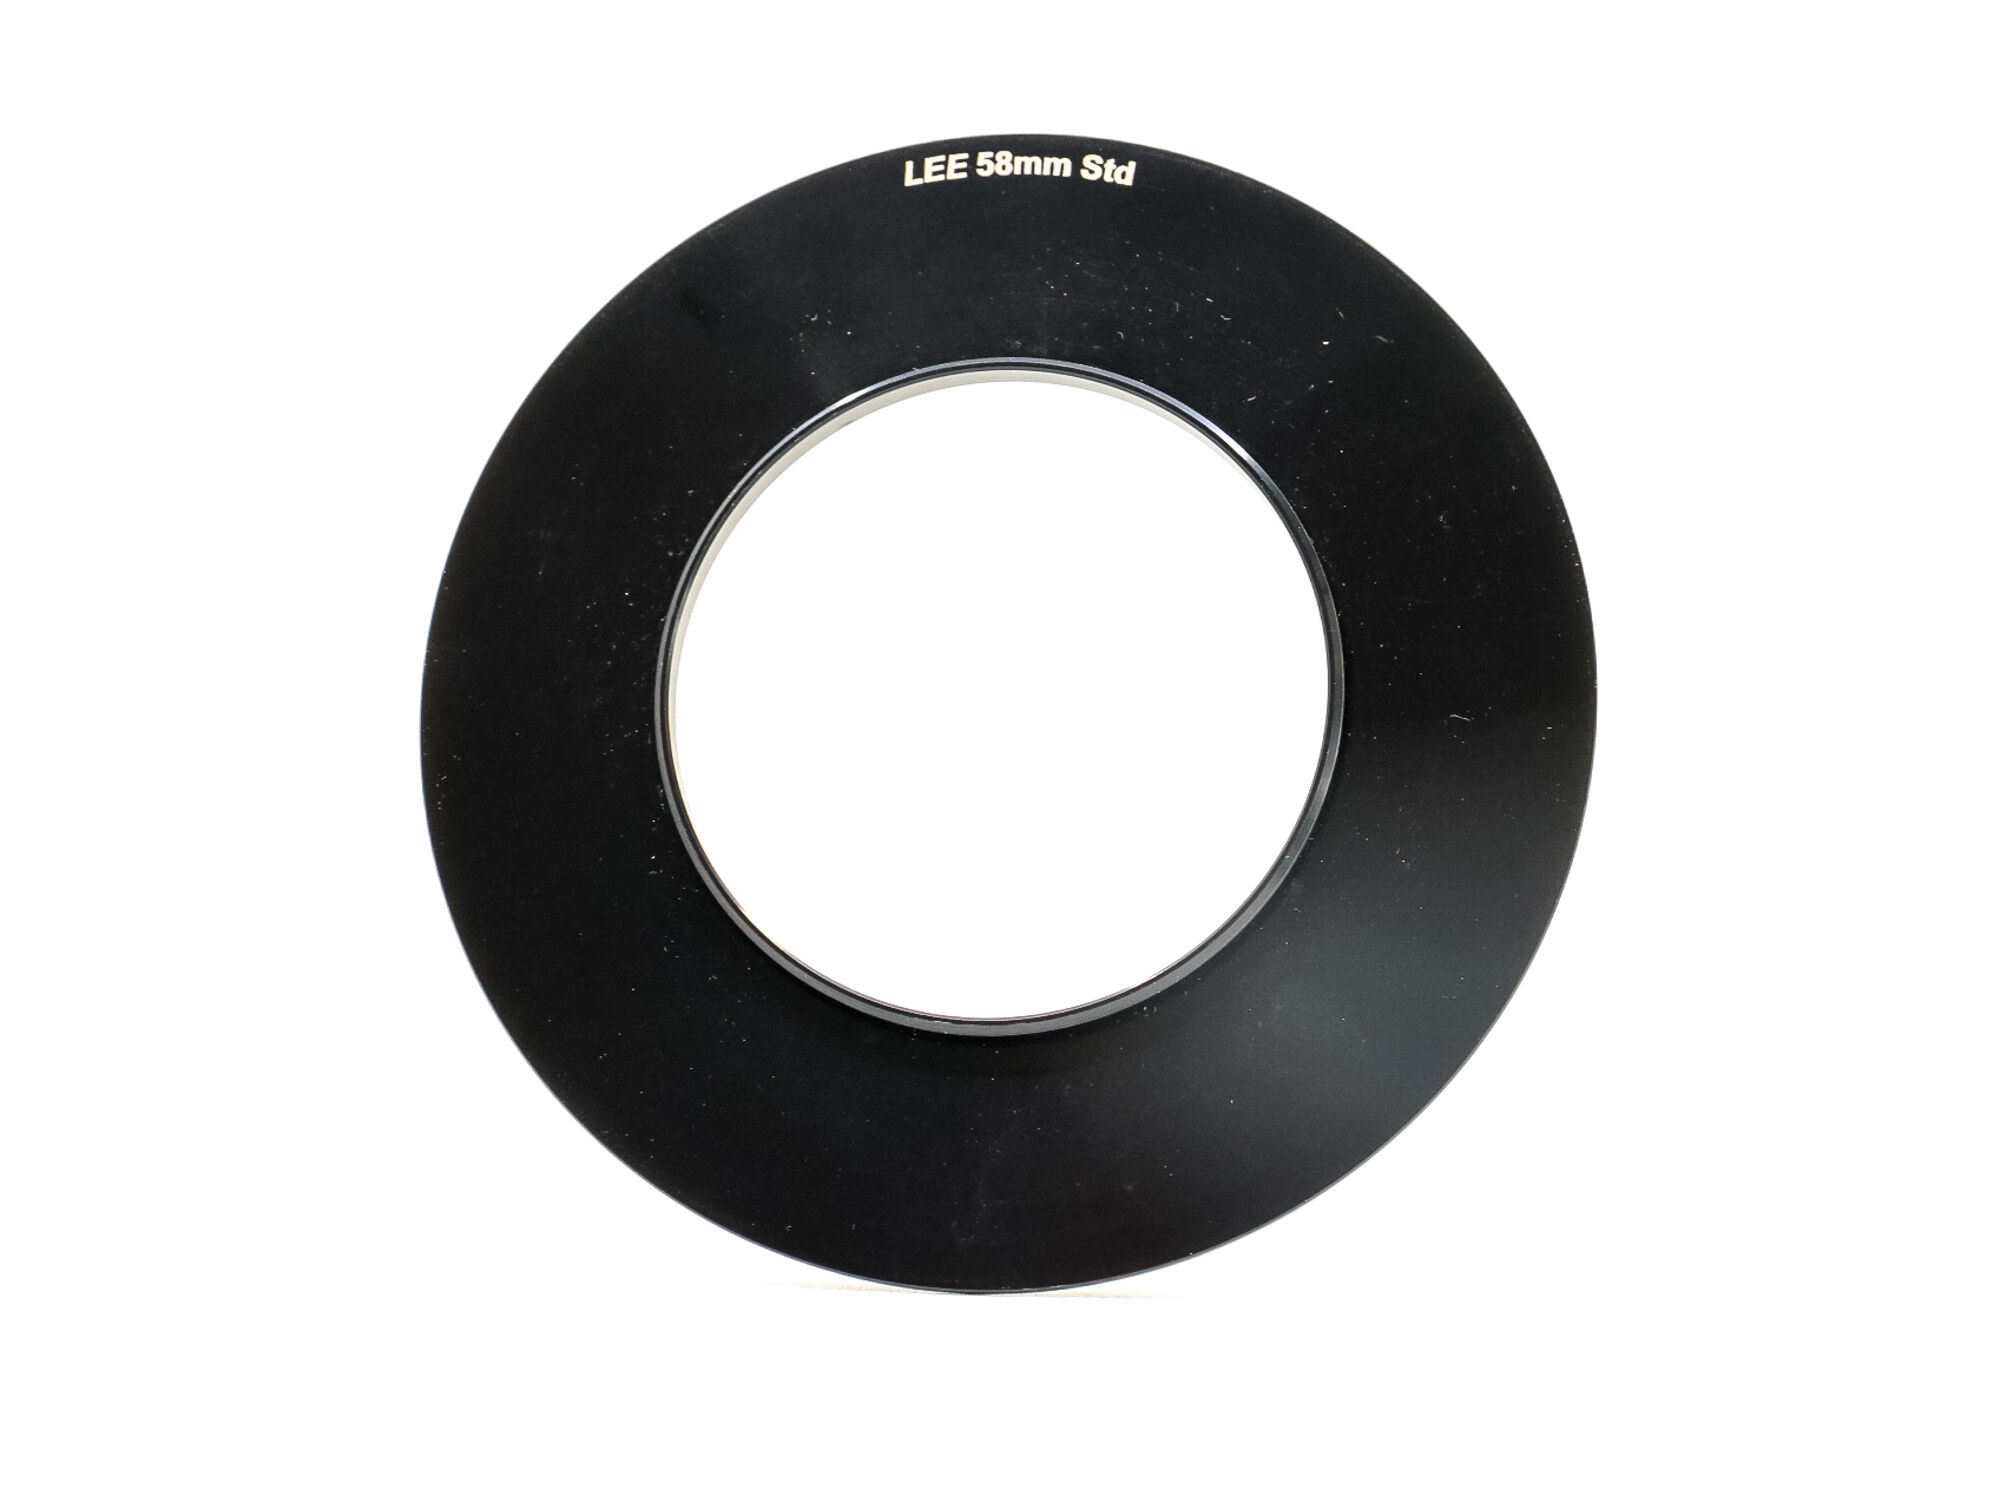 Lee 58mm Adapter Ring (Condition: Excellent)